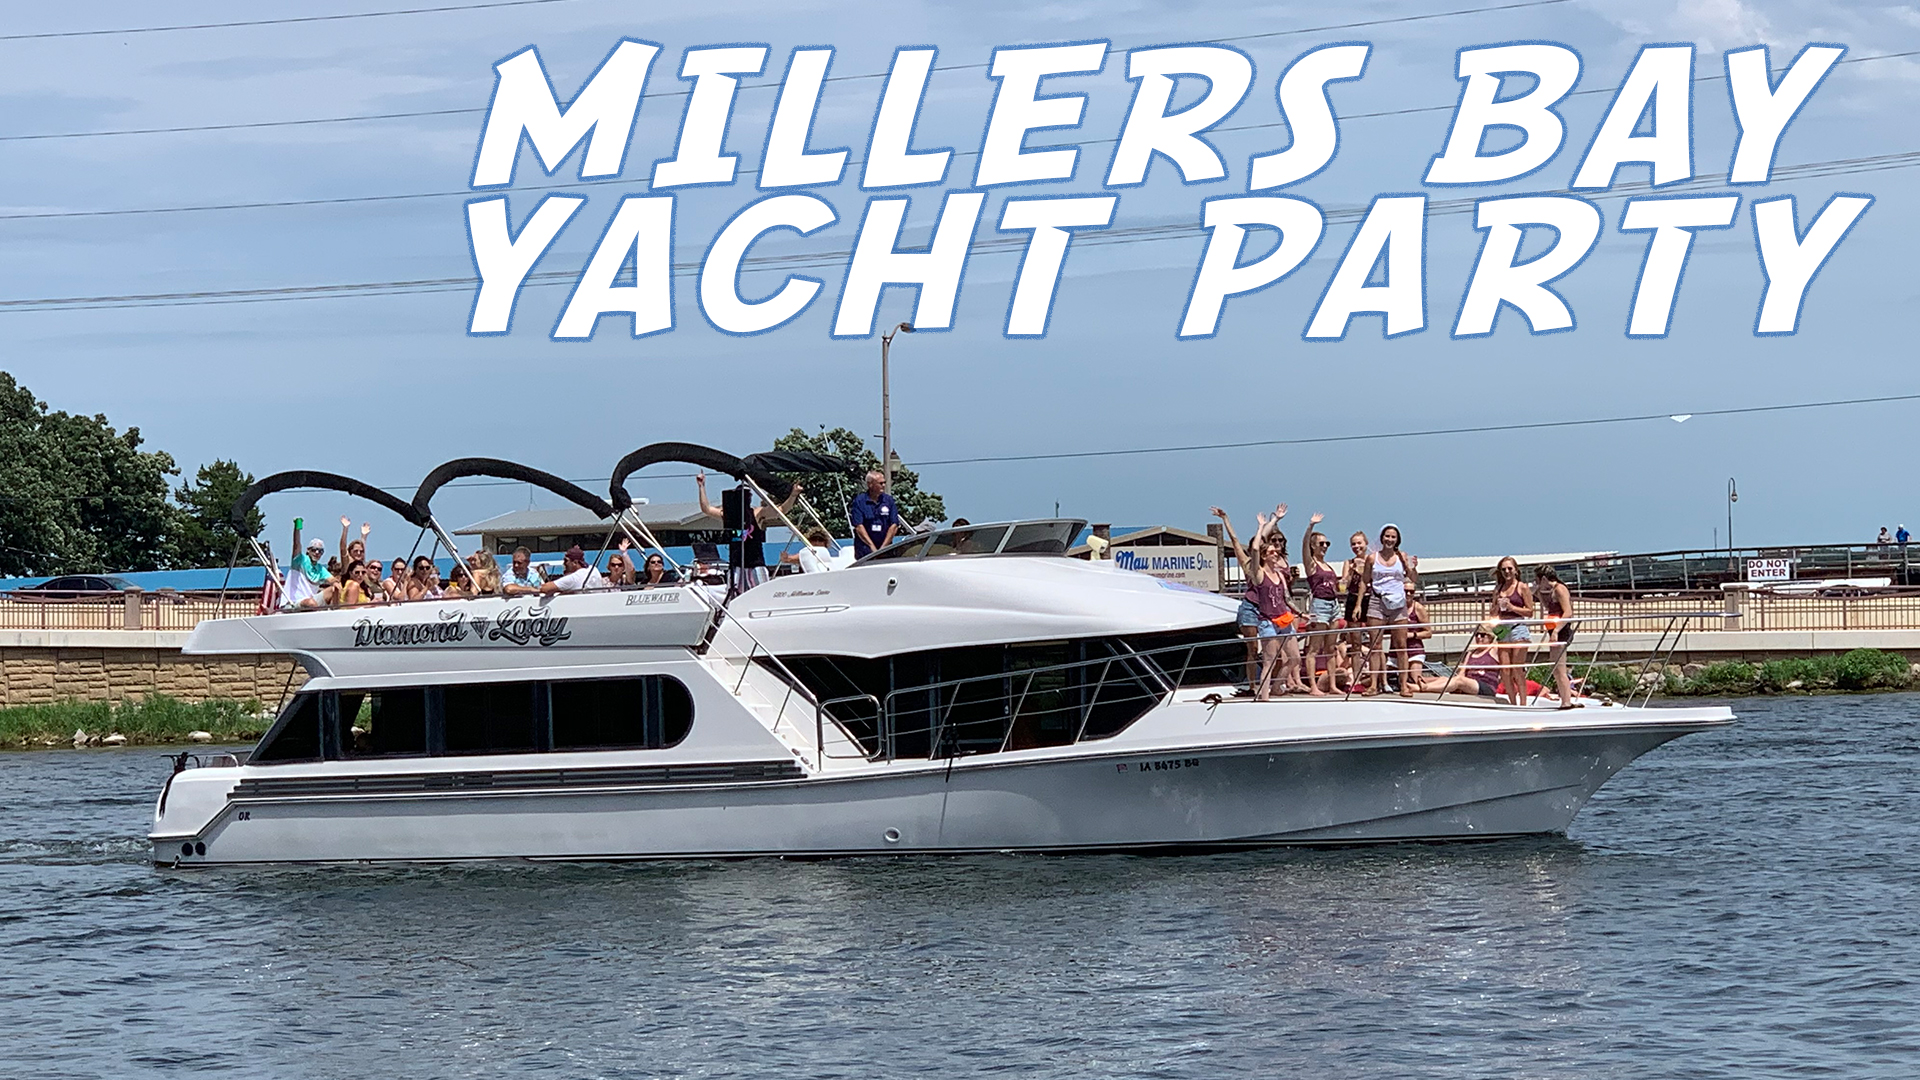  MILLERS BAY YACHT PARTY 